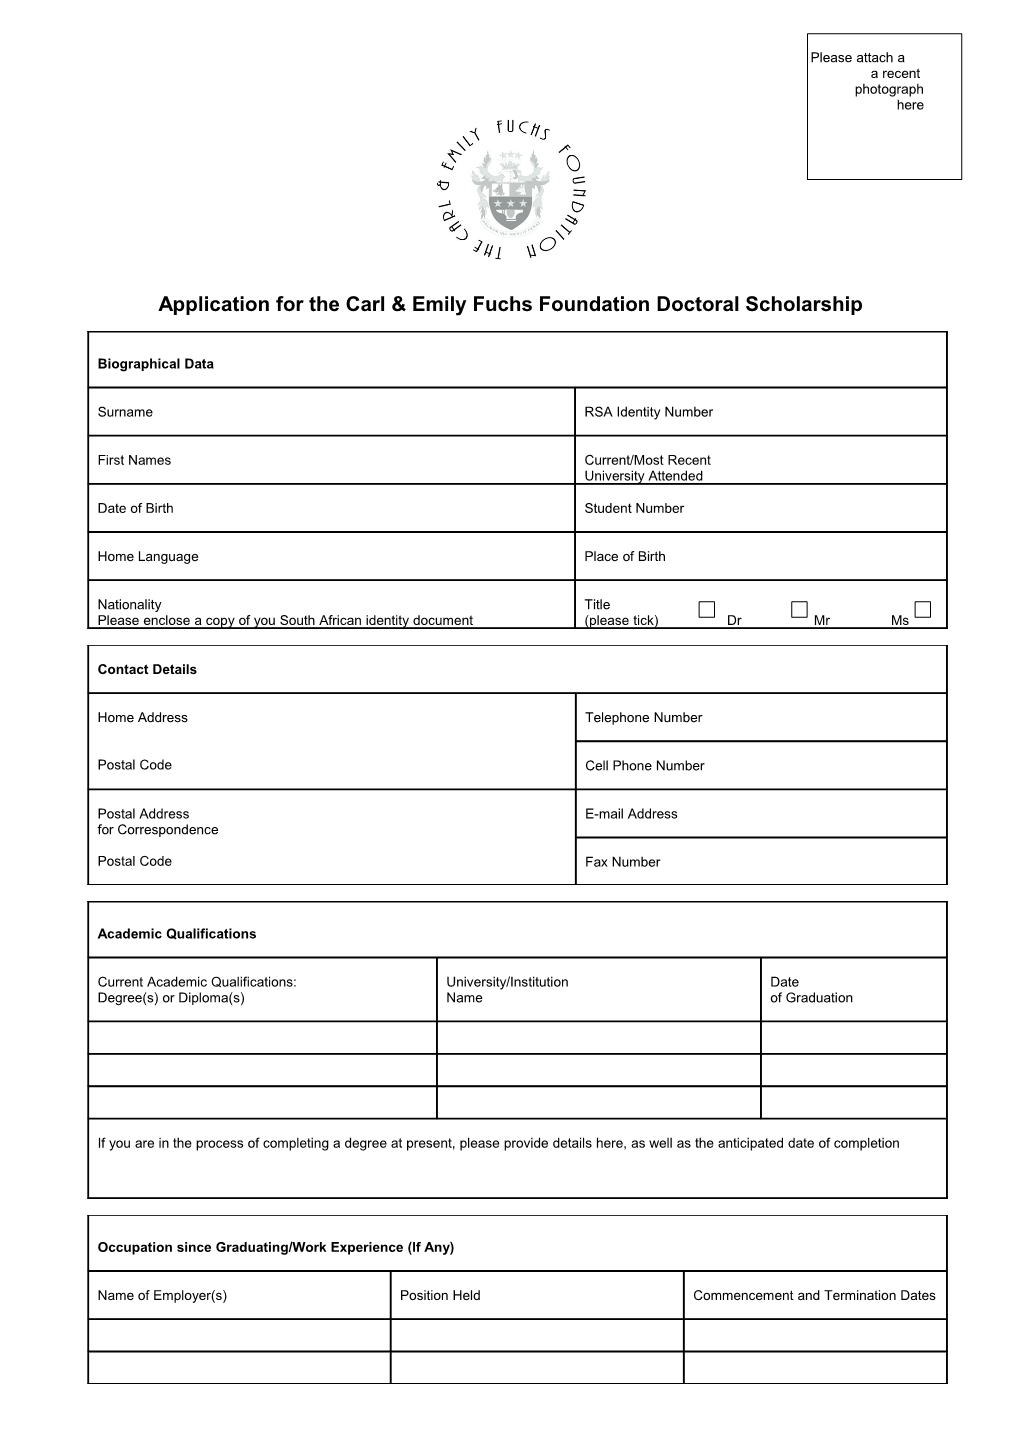 Application for the Carl & Emily Fuchs Foundation Doctoral Scholarship